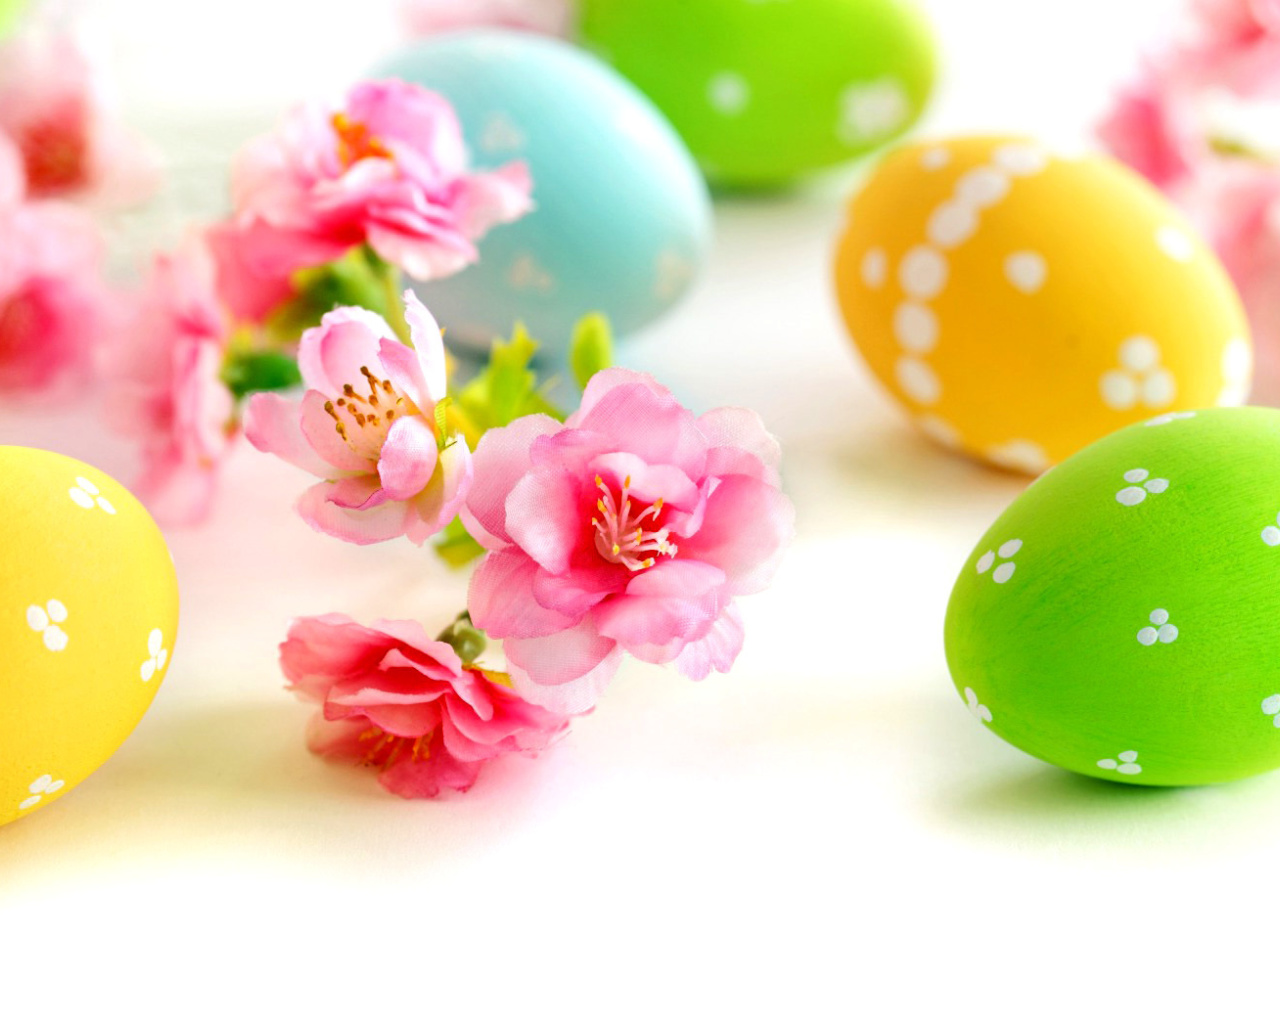 Easter Eggs and Spring Flowers wallpaper 1280x1024